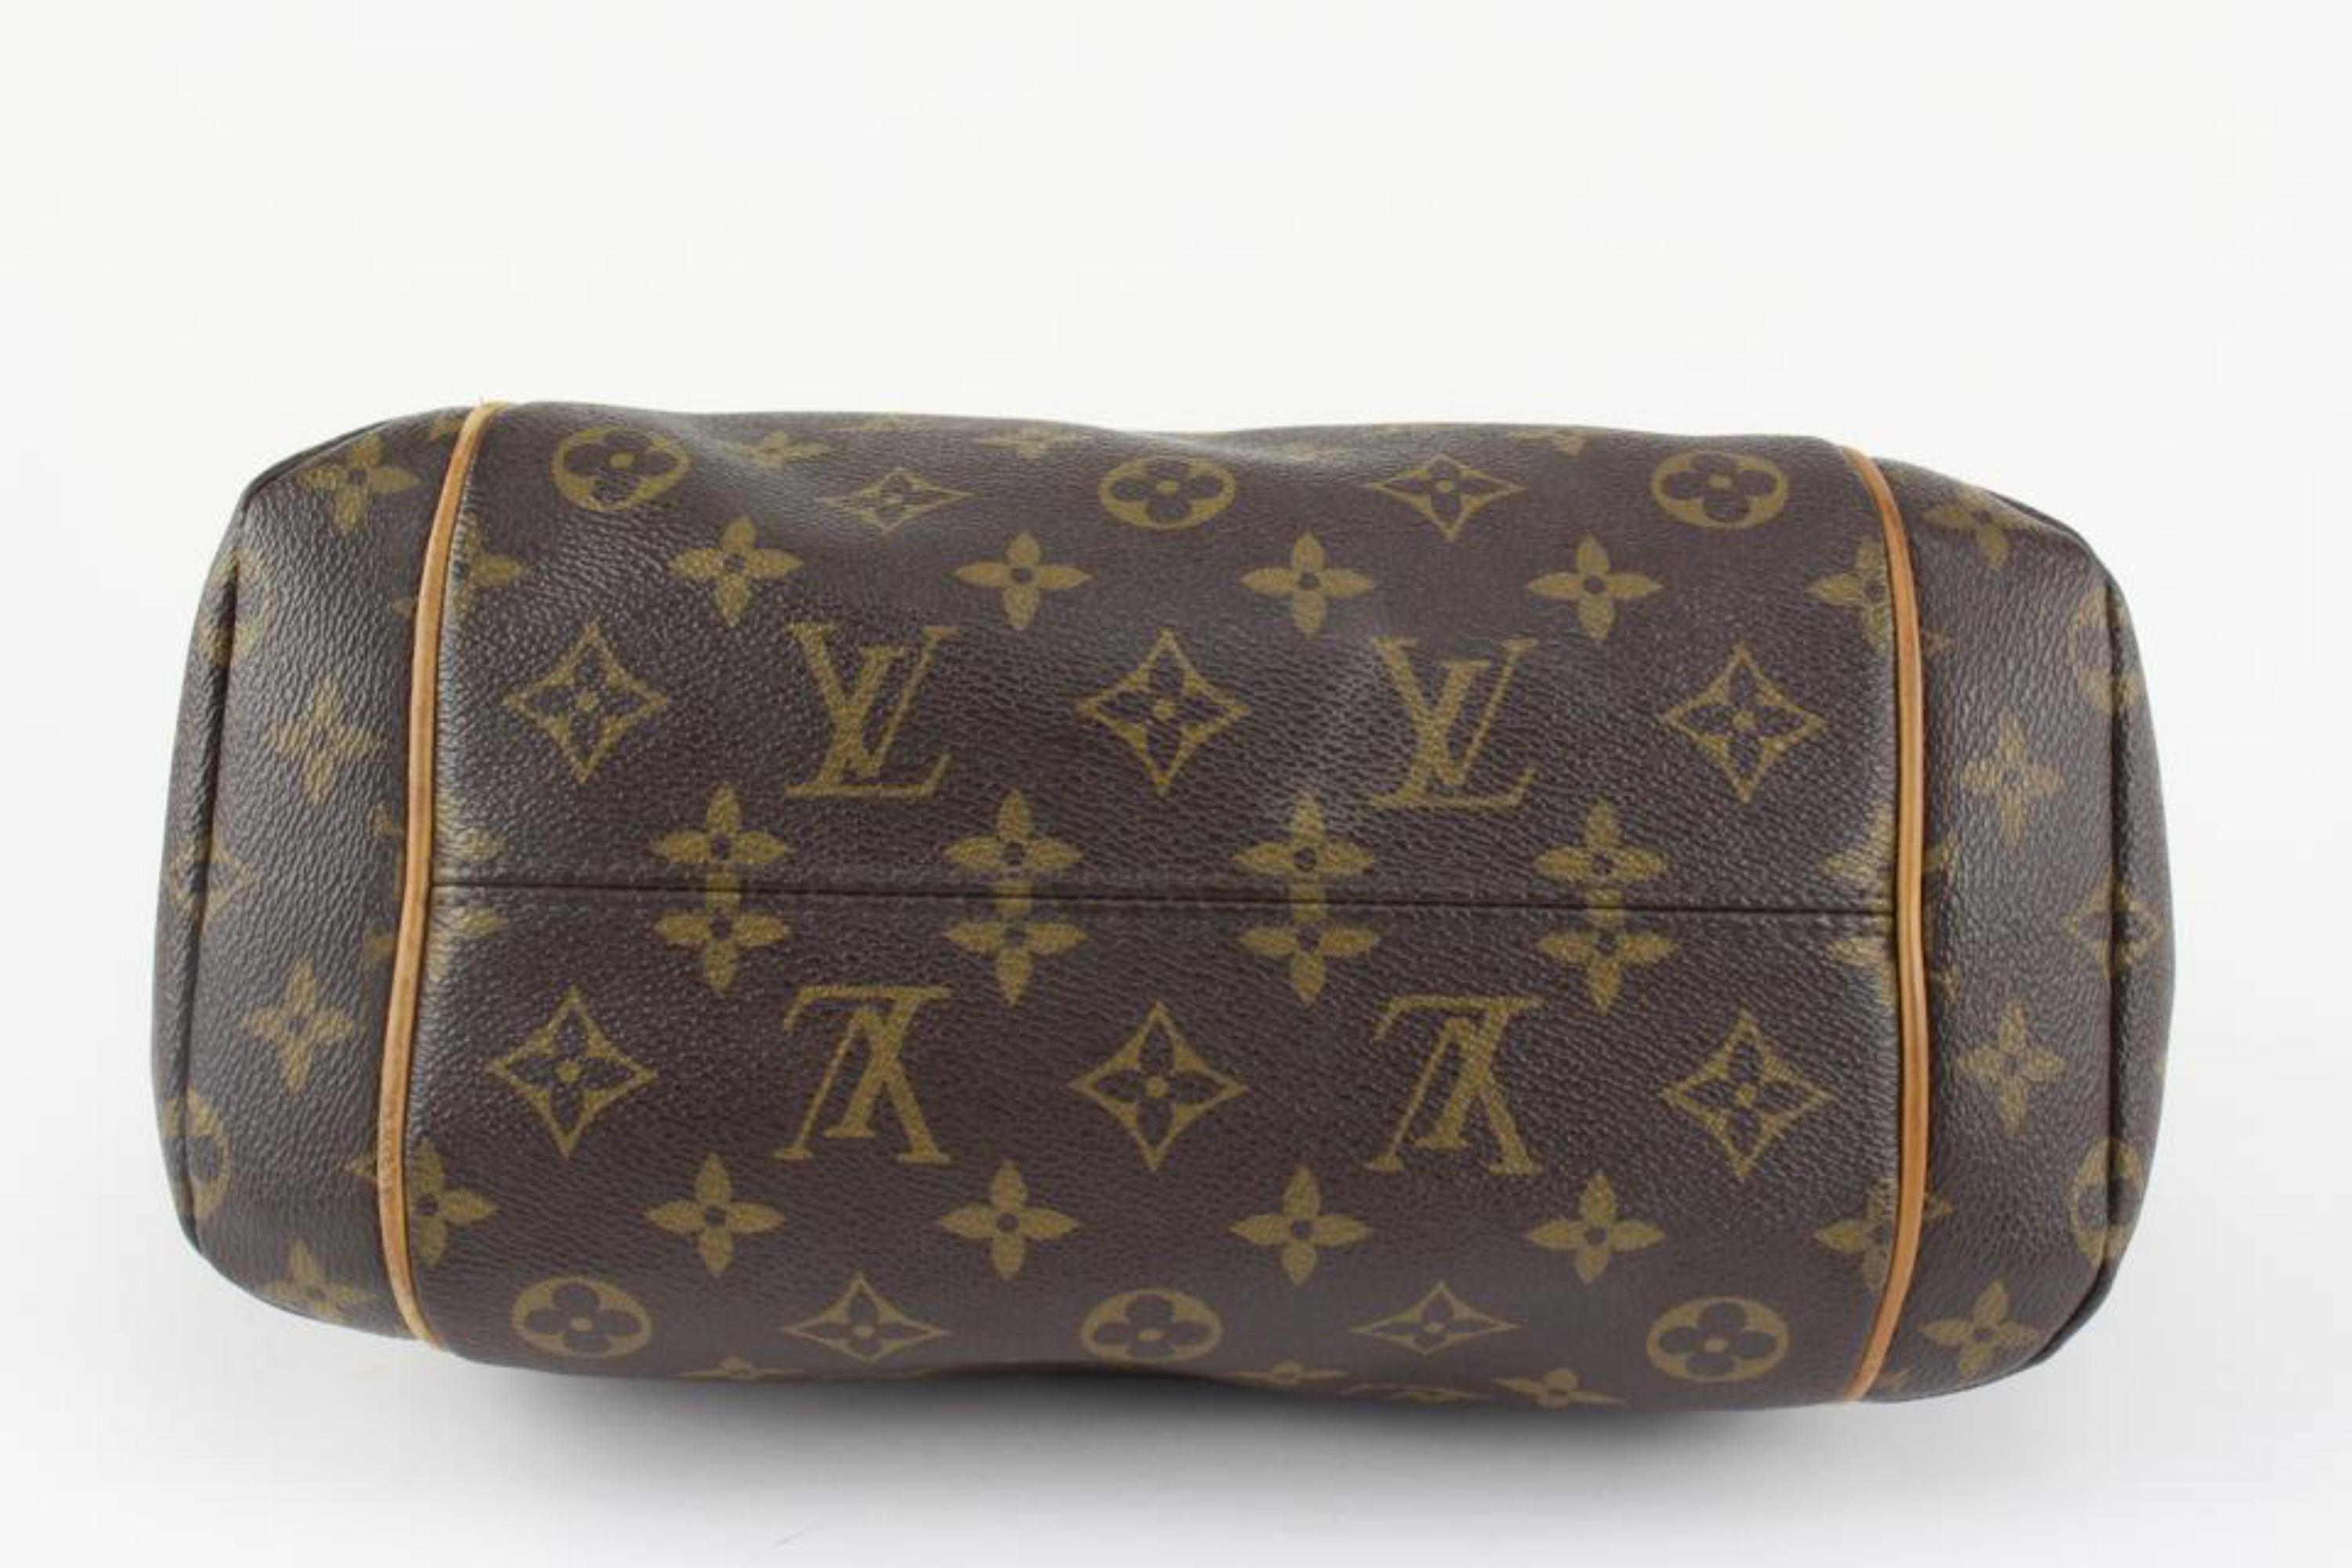 Louis Vuitton Monogram Totally PM Zip Tote Shoulder Bag 1130lv20 In Good Condition For Sale In Dix hills, NY